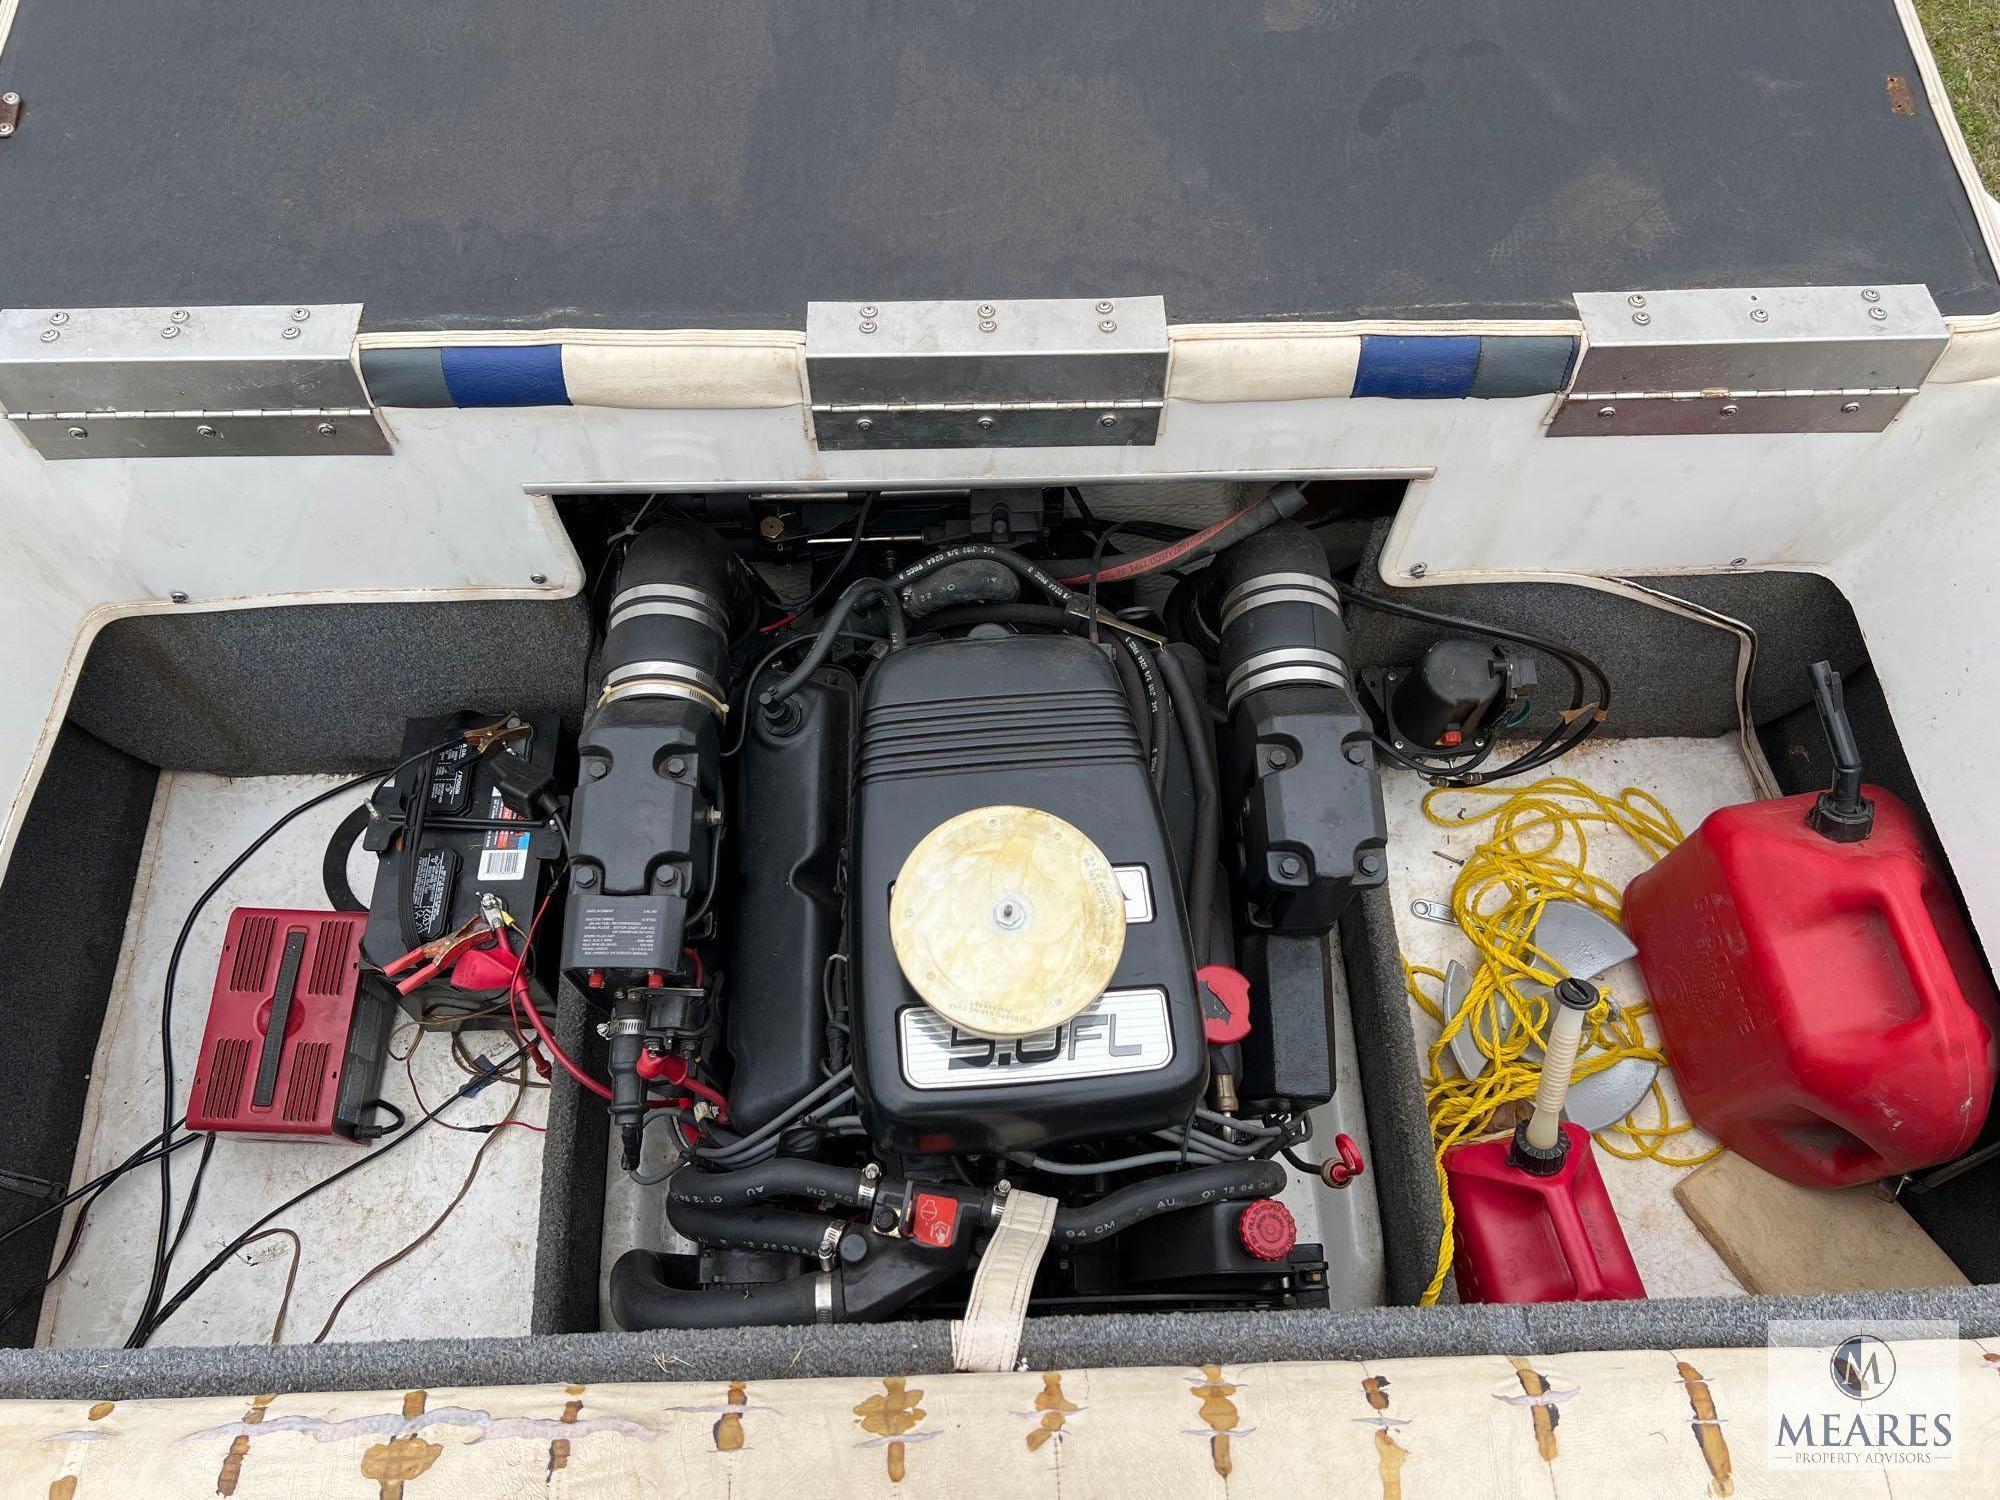 Rivera 220 Deck Boat with Volvo Penta 5.0L Inboard Motor and Trailer